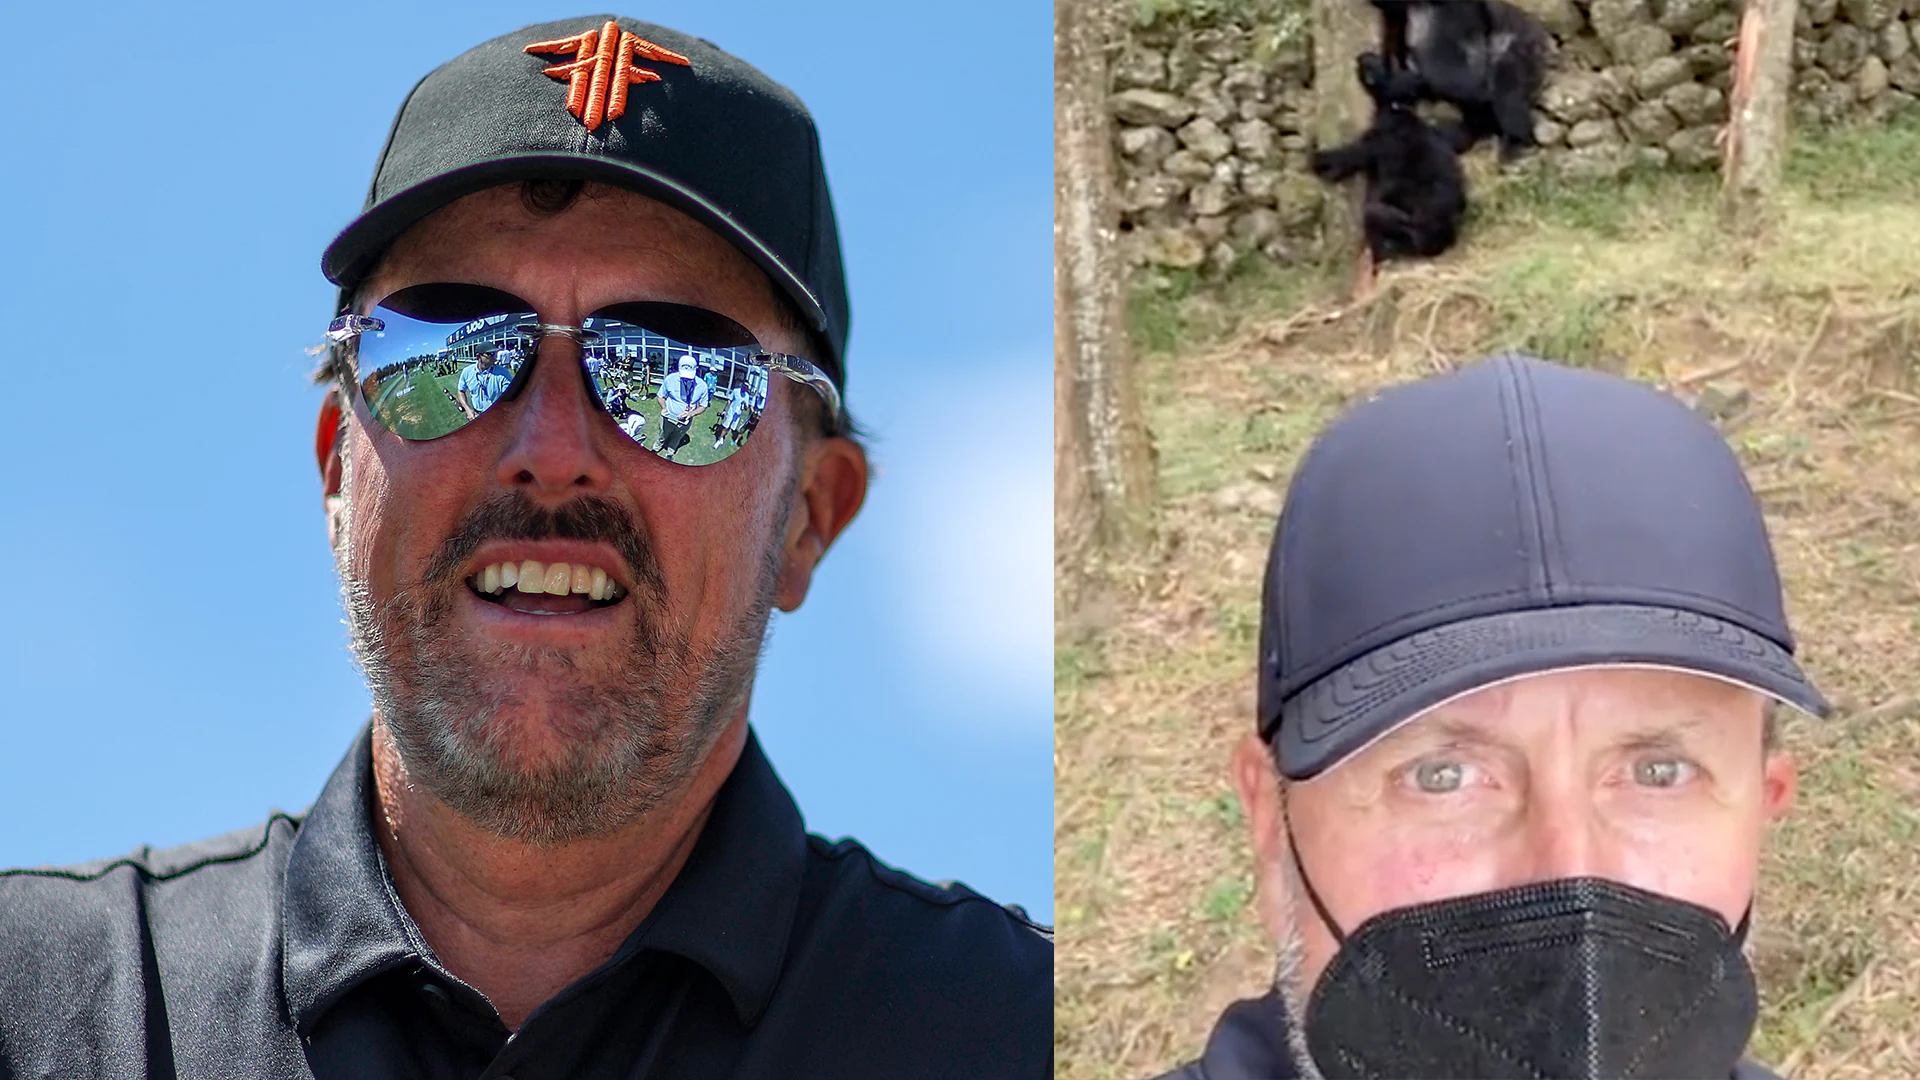 ‘They sang happy birthday’: Phil Mickelson explains viral gorilla video